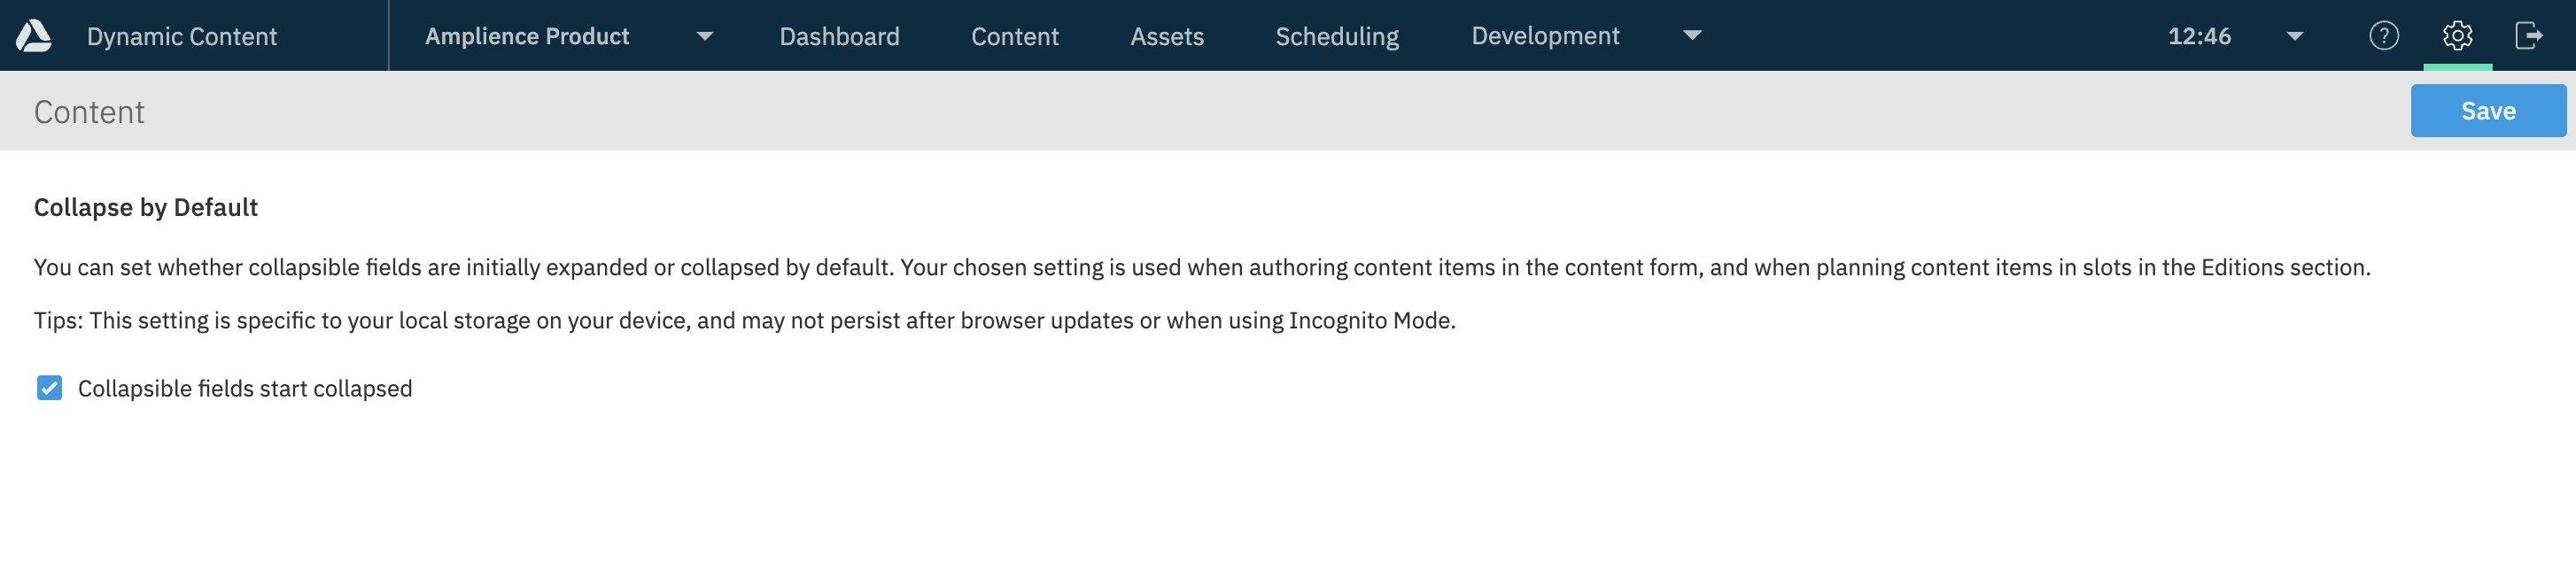 Content settings dialog for setting collapsible fields initial state